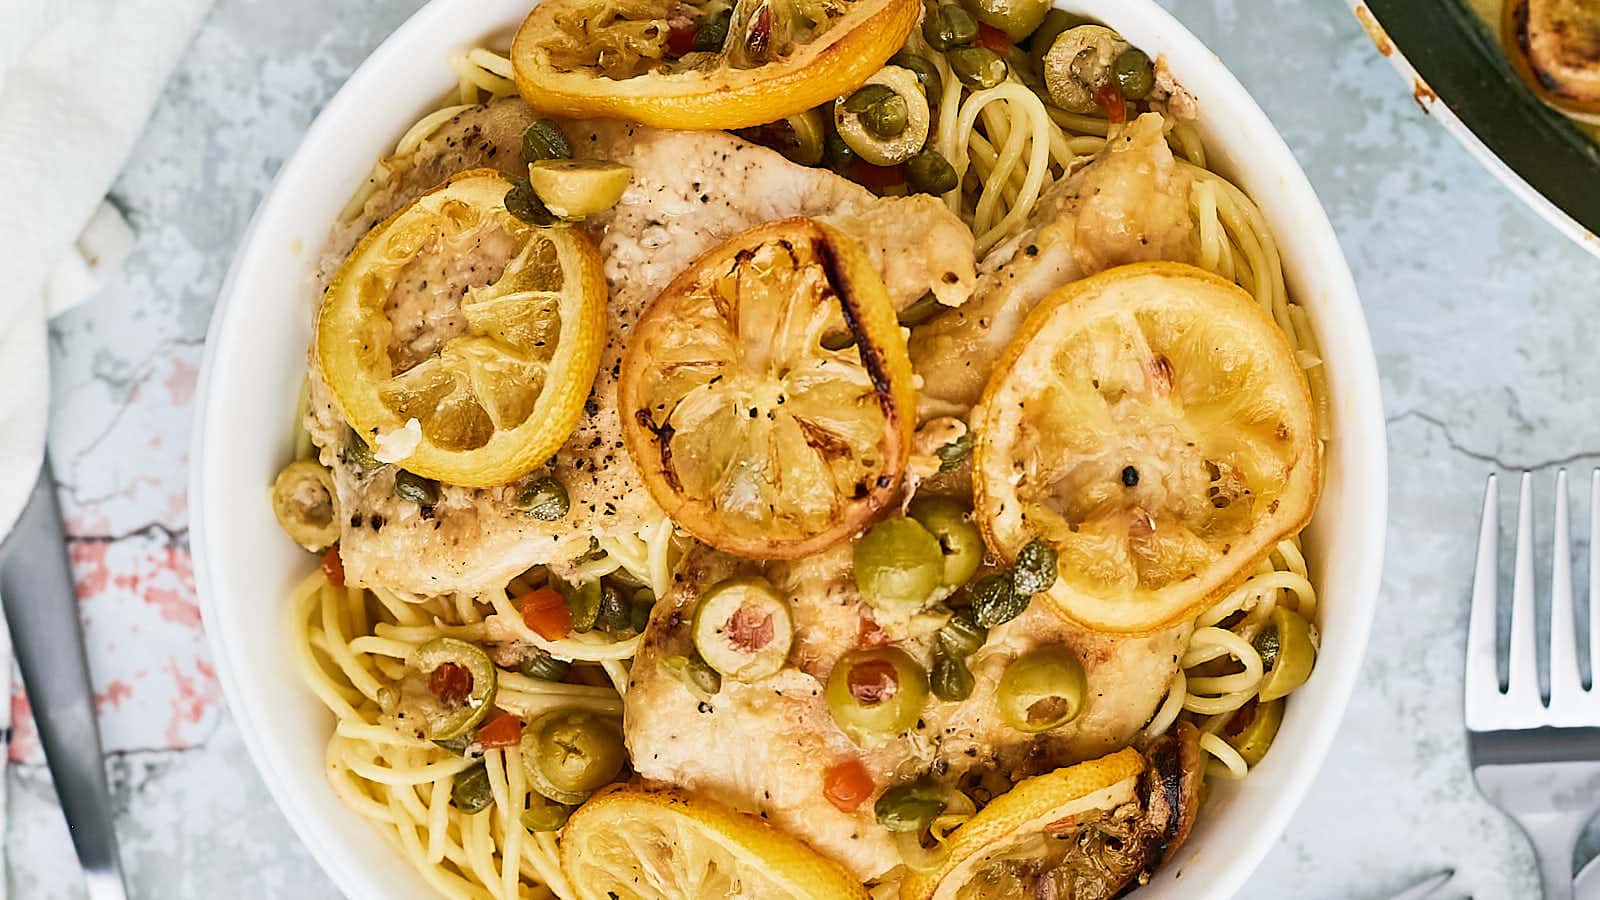 Roasted lemon Chicken with Capers And Olives recipe by Cheerful Cook.